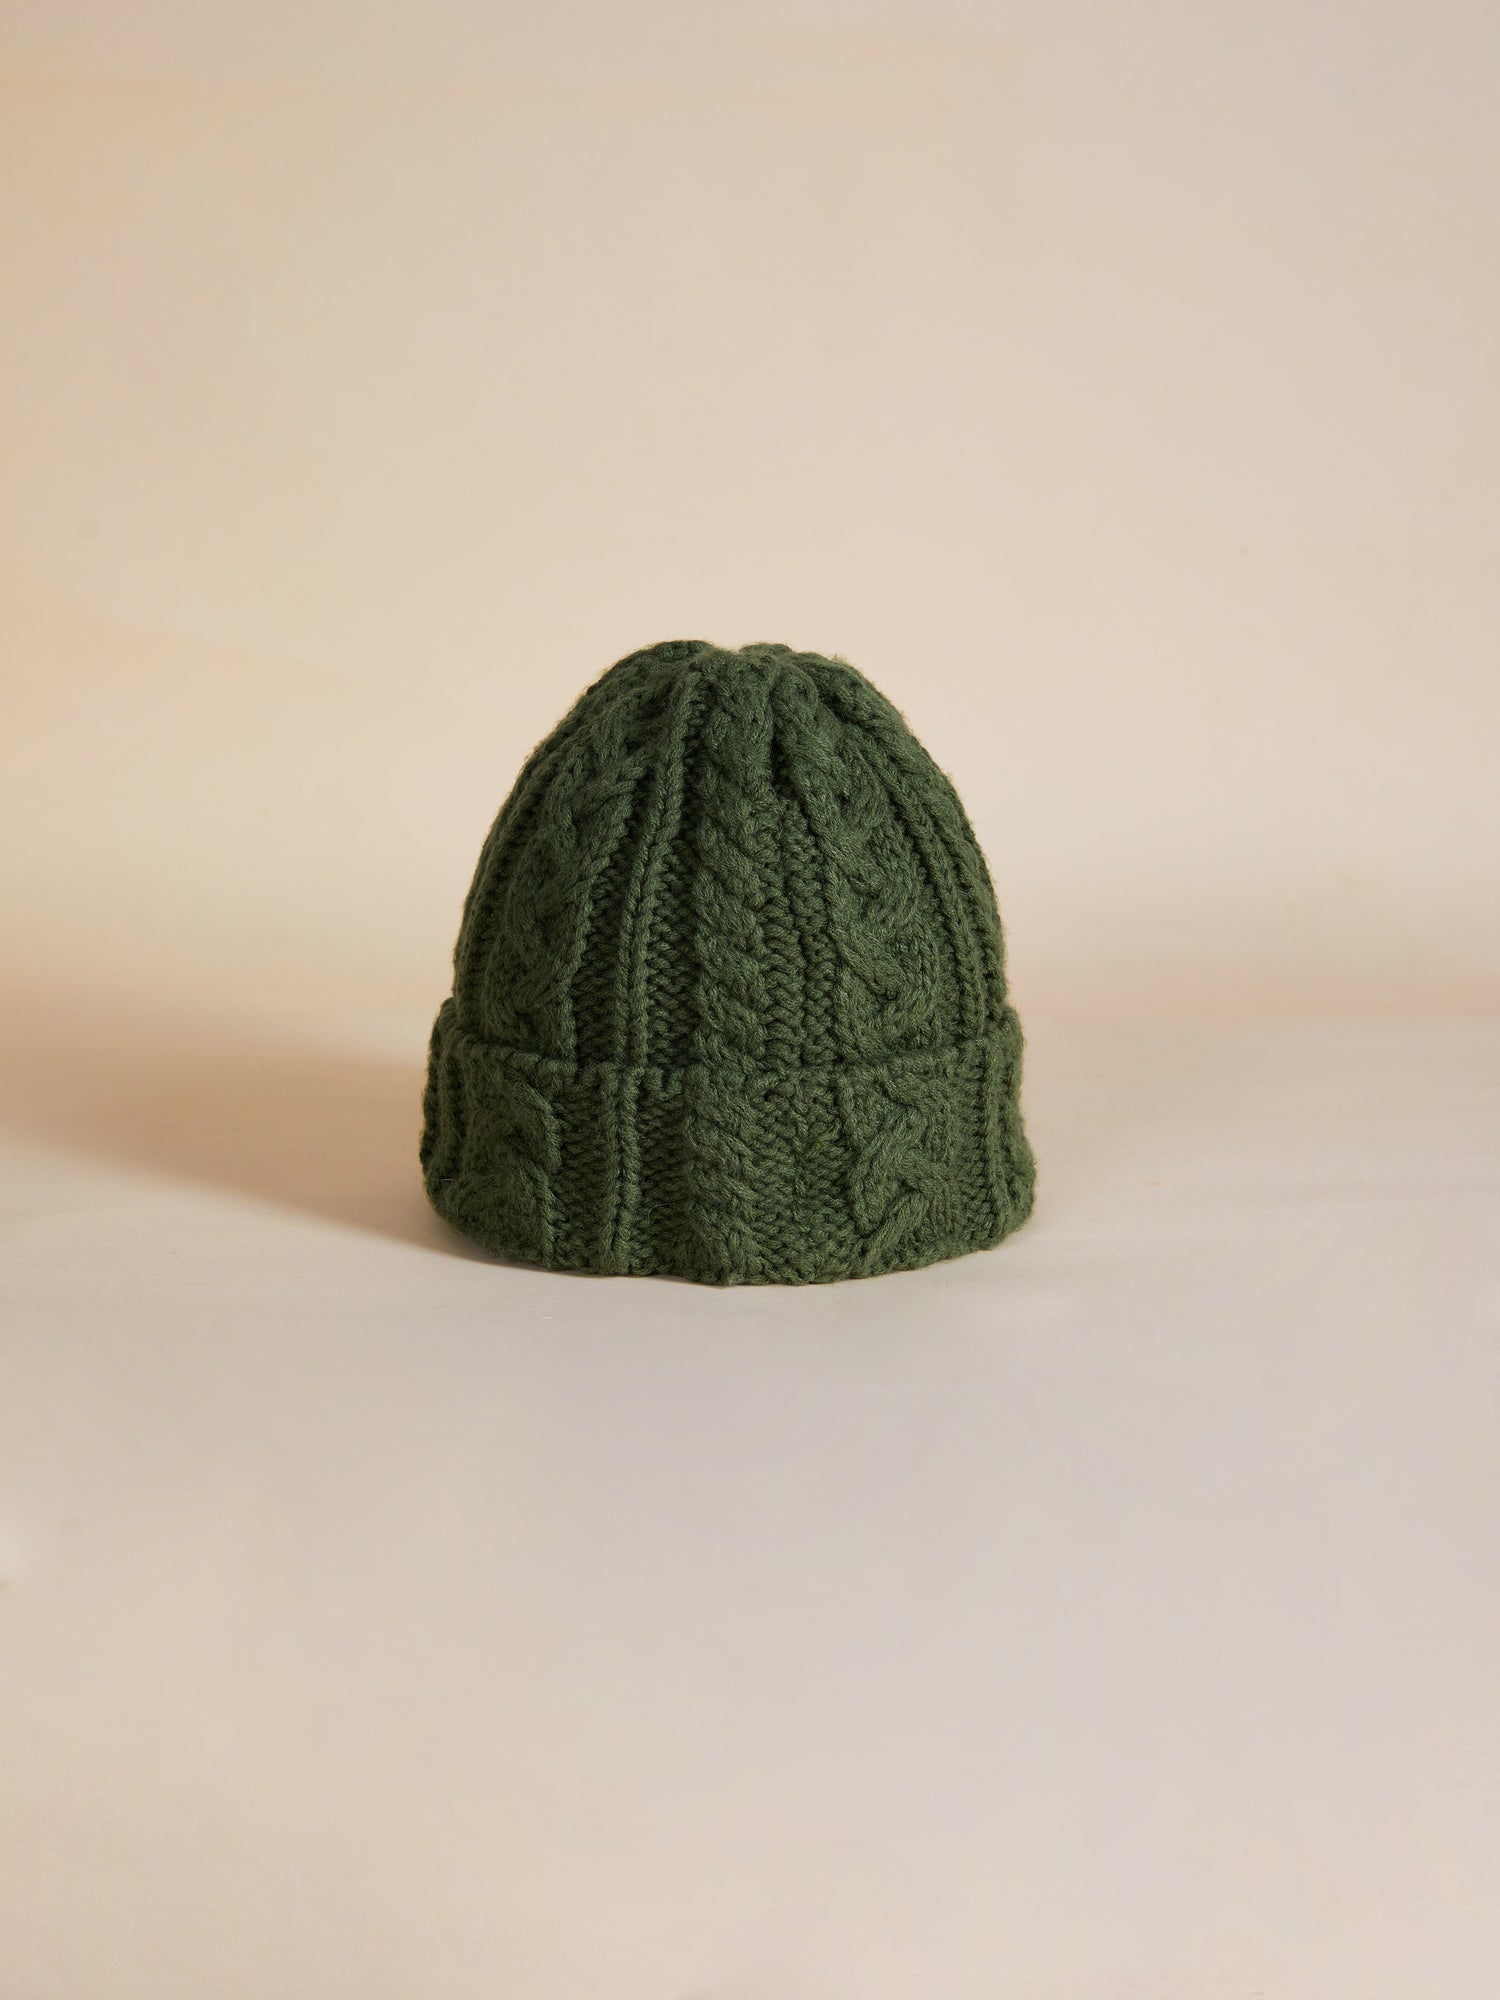 A Forest Cable Knit Beanie by Profound on a white background.